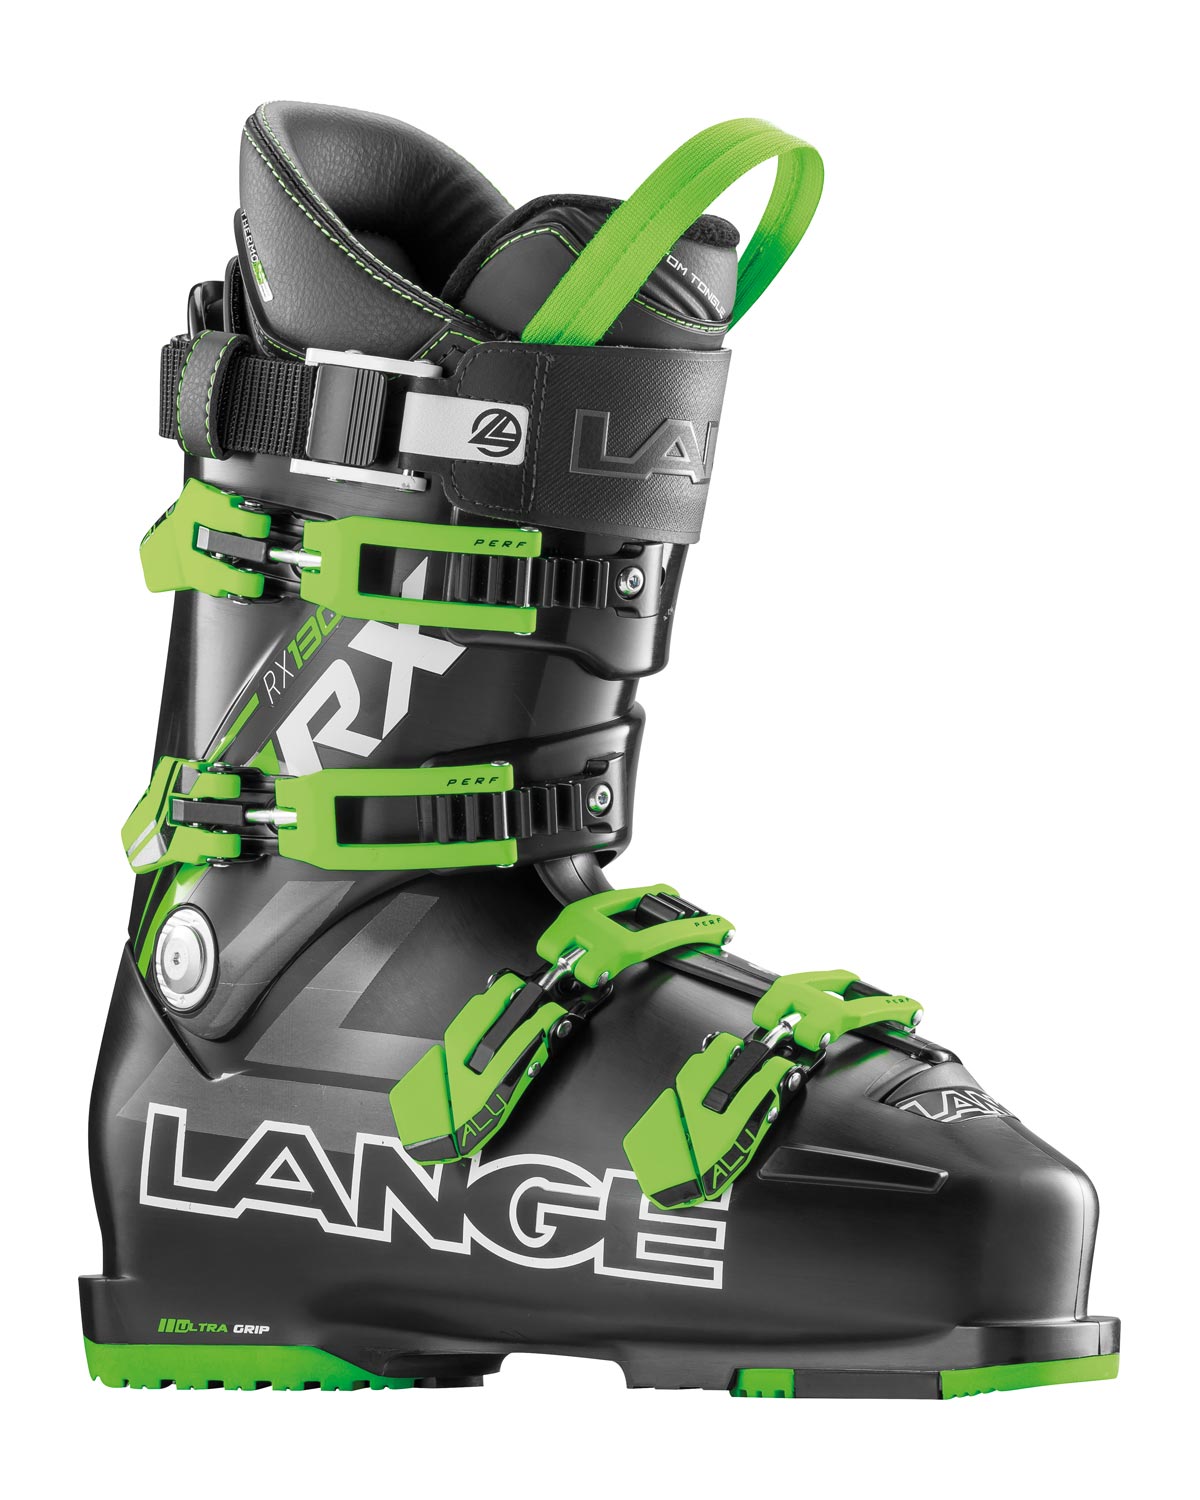 Long RX: The mixture of racing and all-mountain ski boot